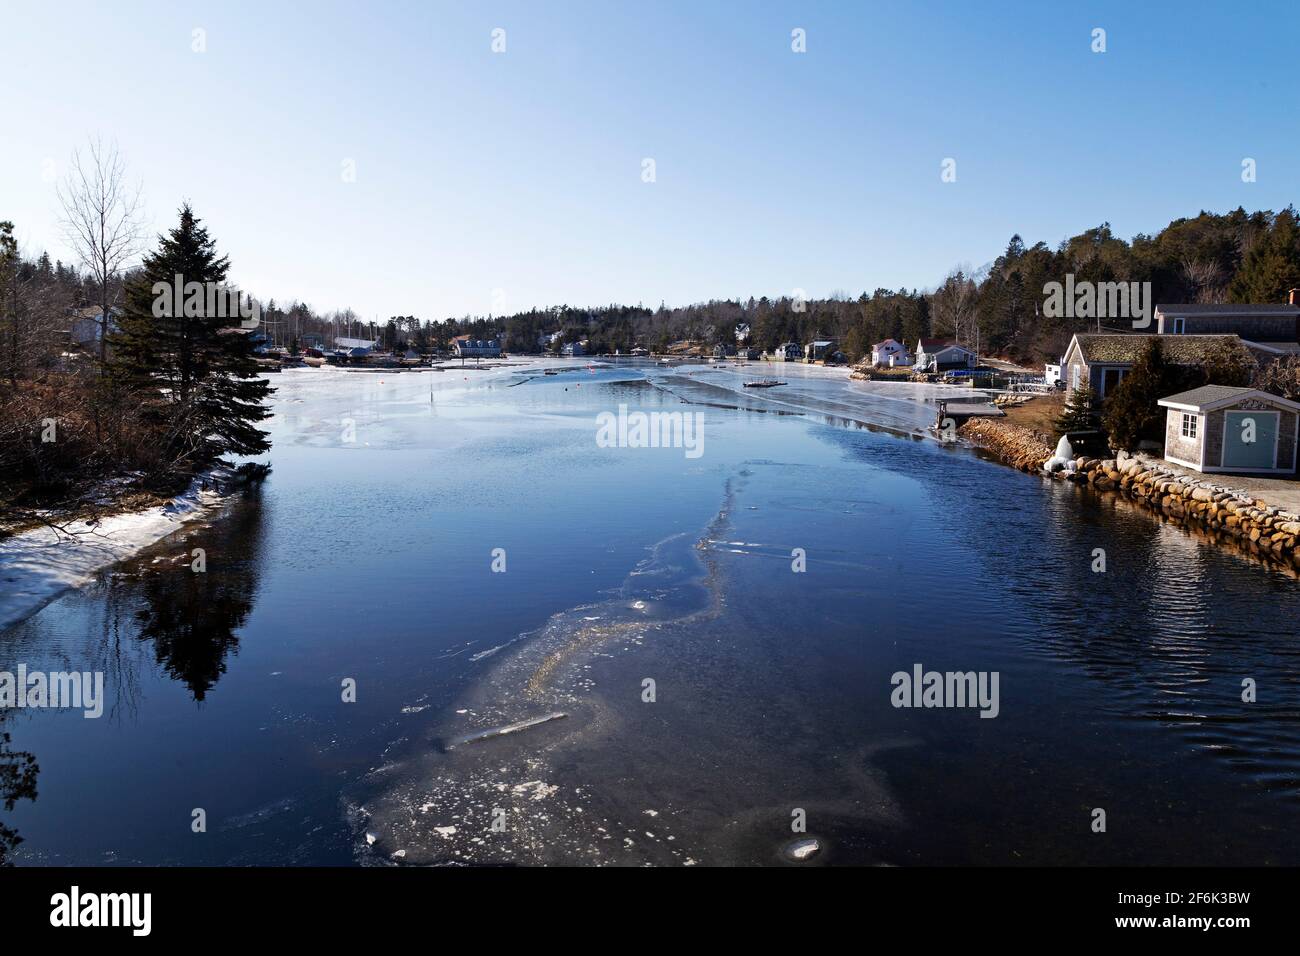 Mill Cove at Chester in Nova Scotia, Canada. The cove's water is partially frozen because of winter weather. Stock Photo